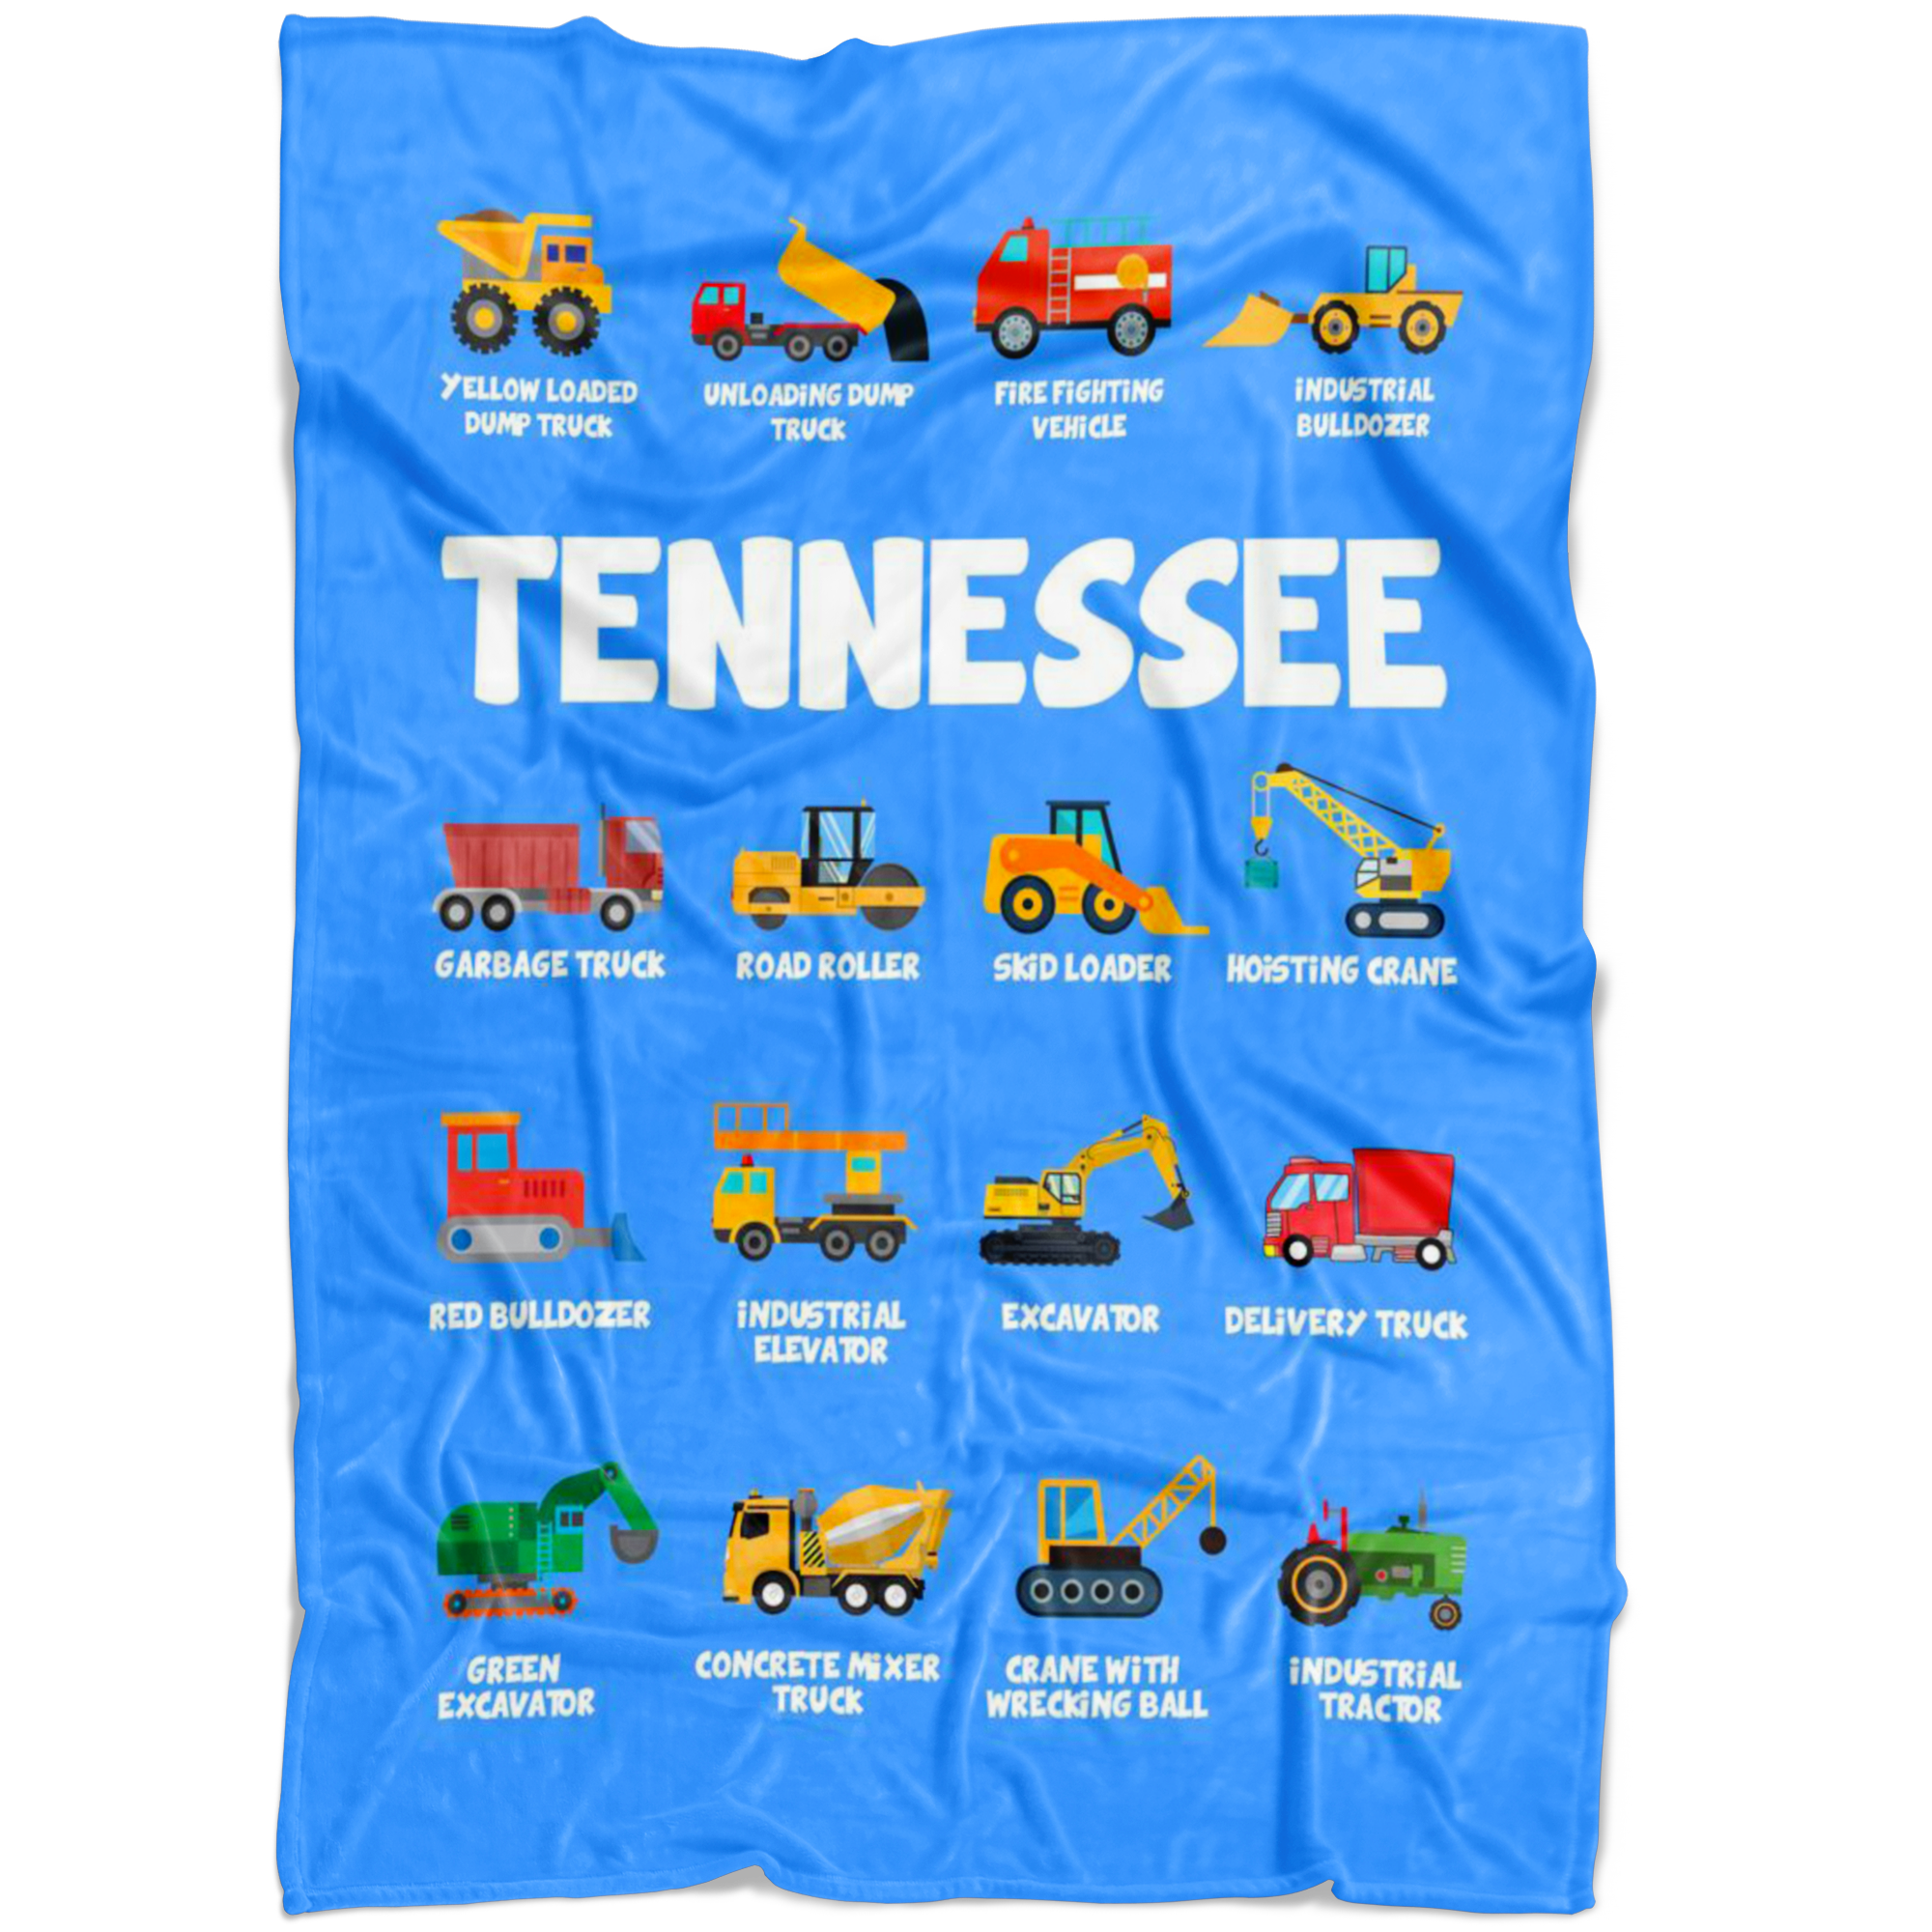 Tennessee Construction Blanket Blue